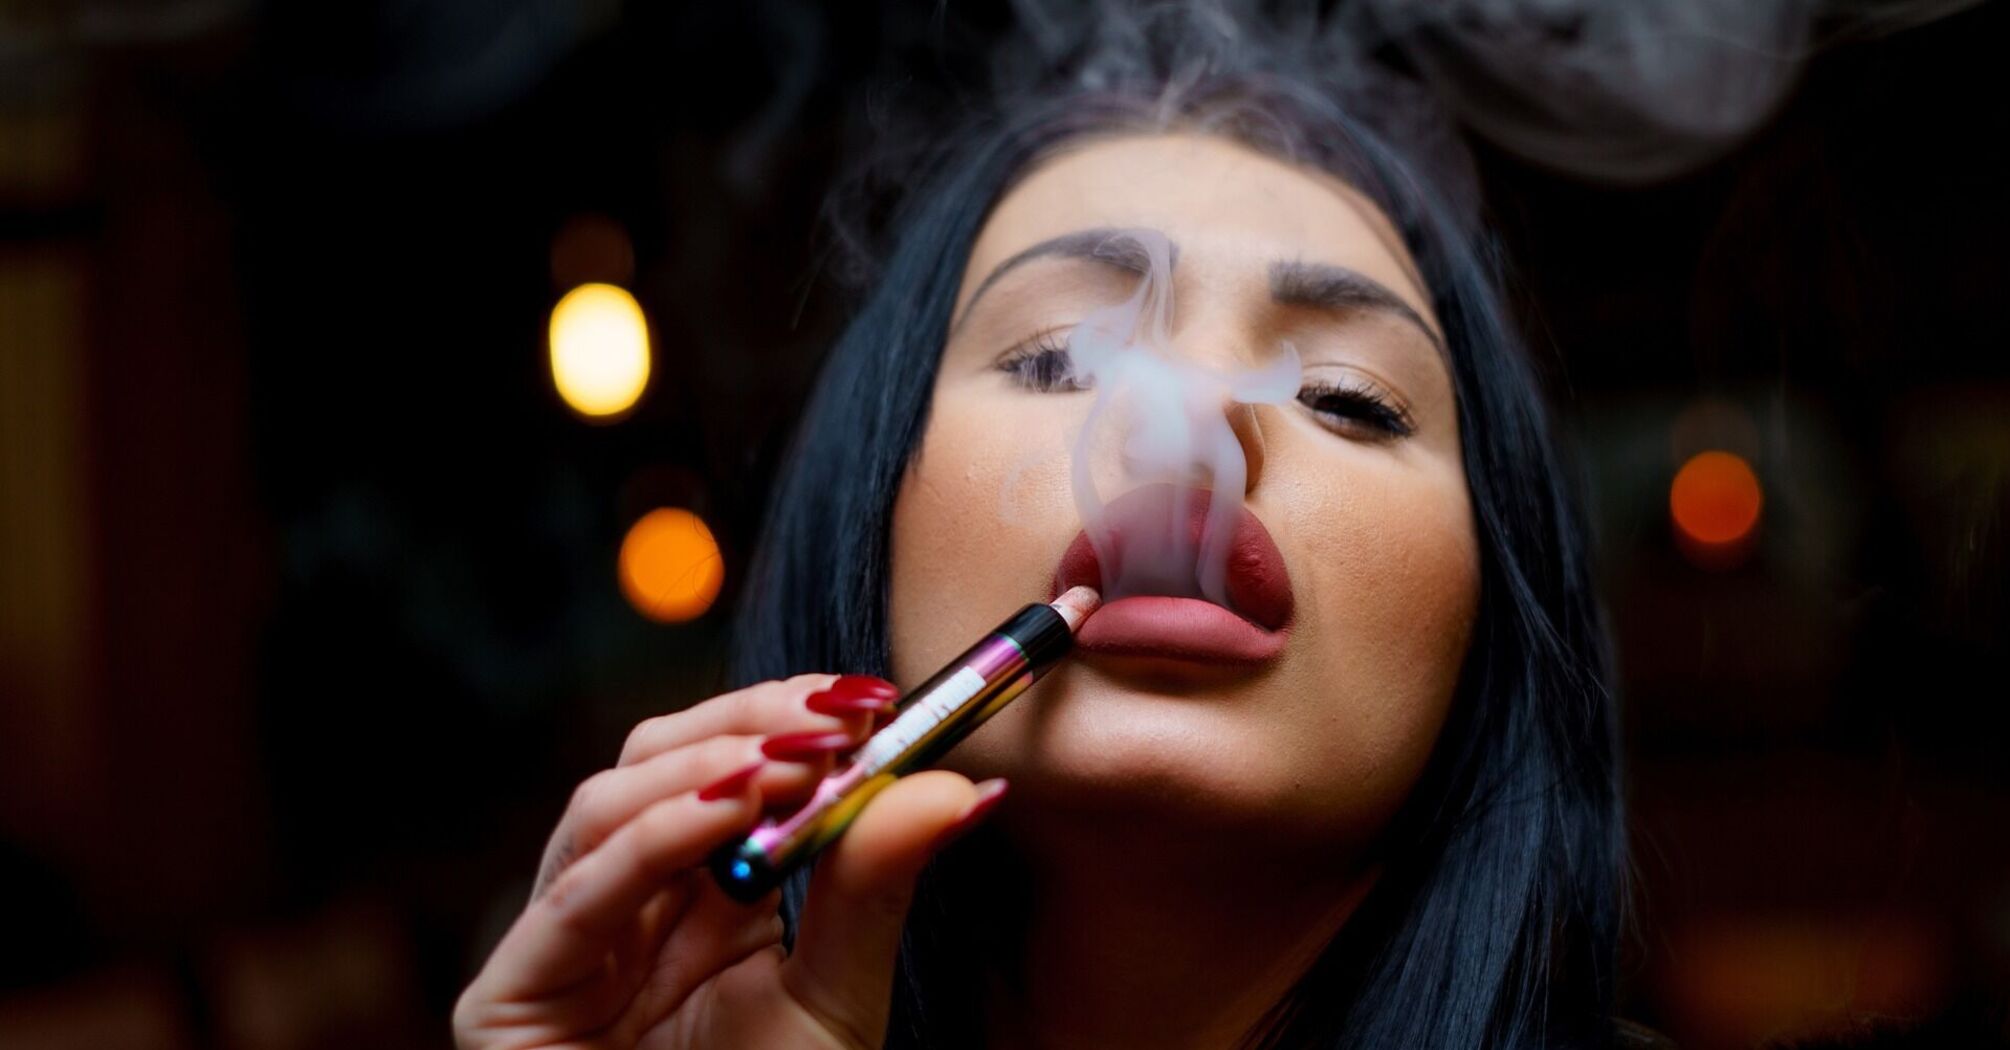 Woman exhaling vapor from an electronic cigarette